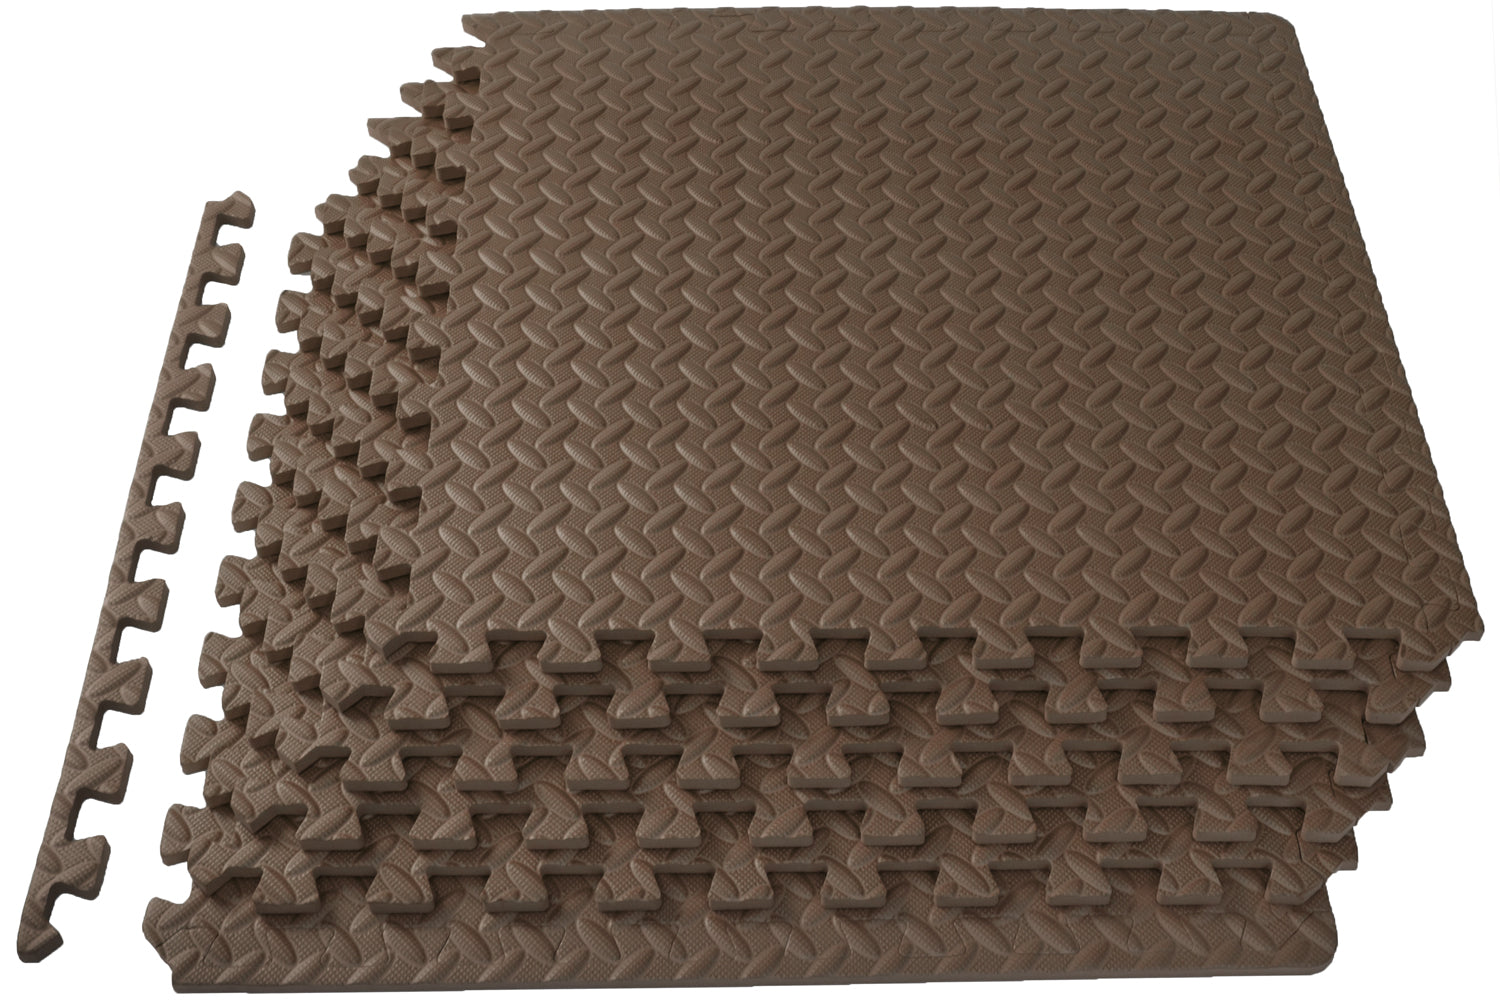 Everyday Essentials 1/2 Thick Flooring Puzzle Exercise Mat with